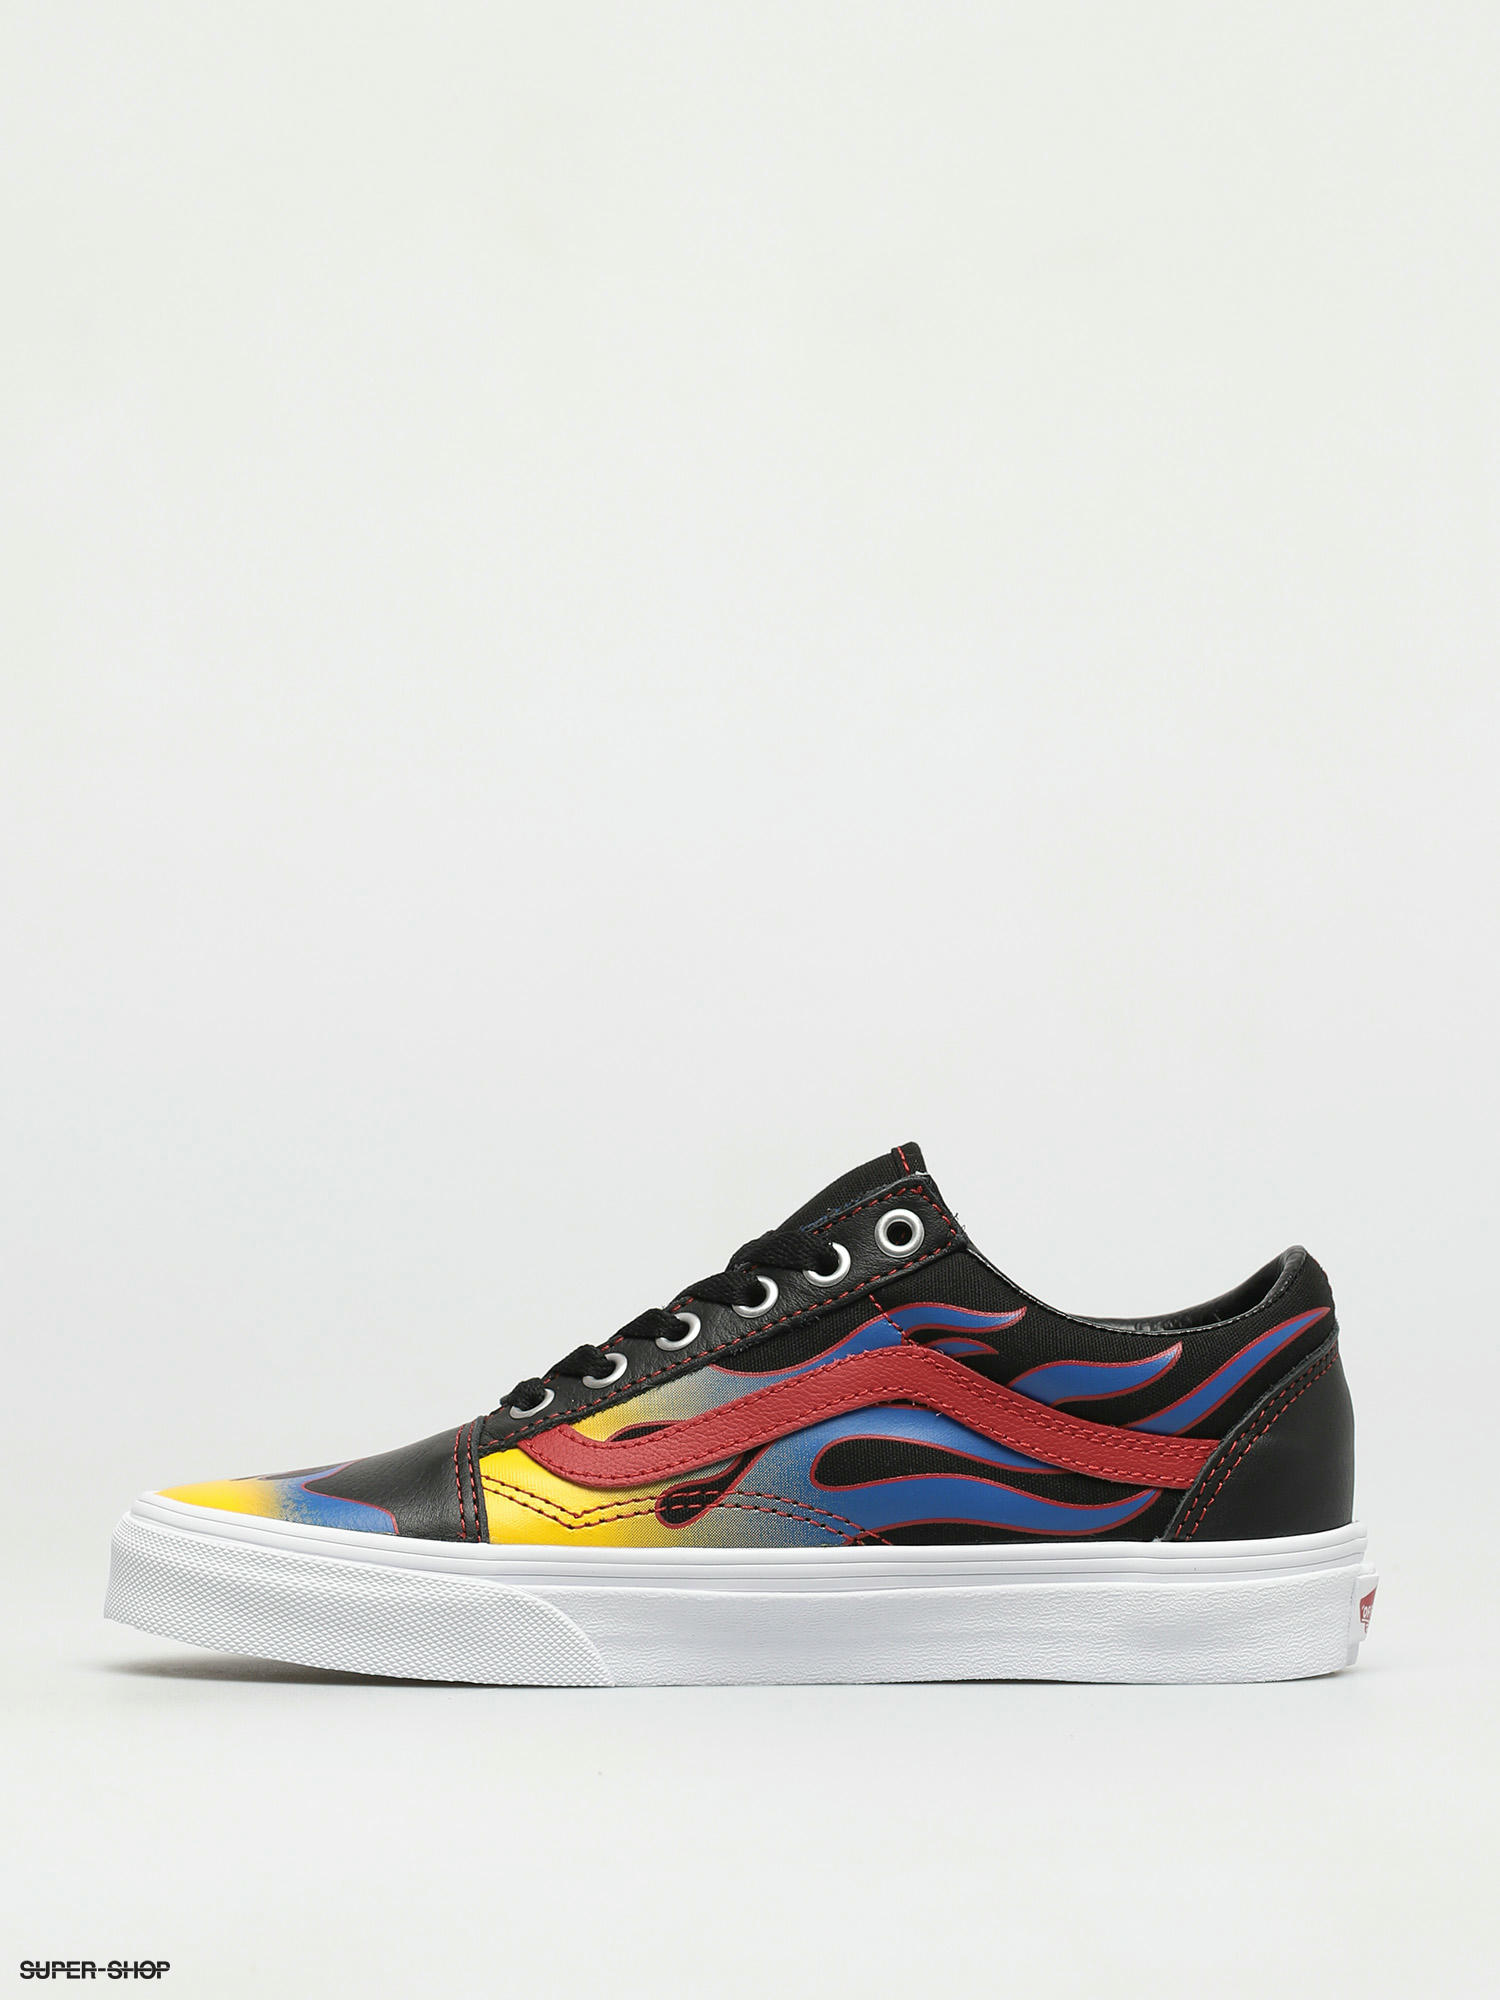 vans shoes black and red